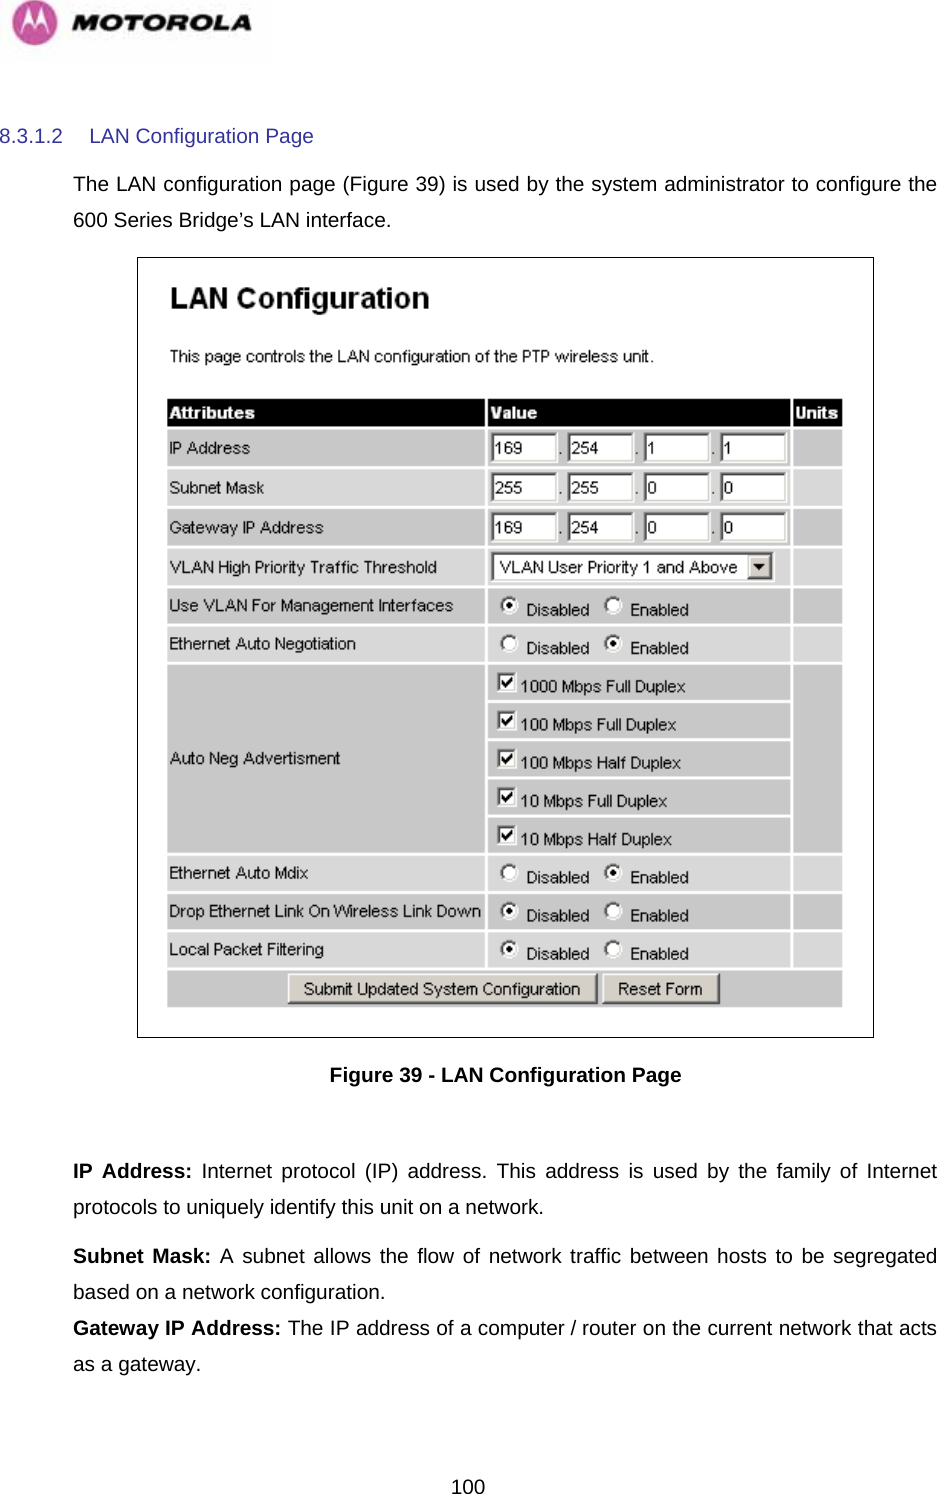   1008.3.1.2  LAN Configuration Page The LAN configuration page (Figure 39) is used by the system administrator to configure the 600 Series Bridge’s LAN interface.  Figure 39 - LAN Configuration Page  IP Address: Internet protocol (IP) address. This address is used by the family of Internet protocols to uniquely identify this unit on a network.  Subnet Mask: A subnet allows the flow of network traffic between hosts to be segregated based on a network configuration.  Gateway IP Address: The IP address of a computer / router on the current network that acts as a gateway. 